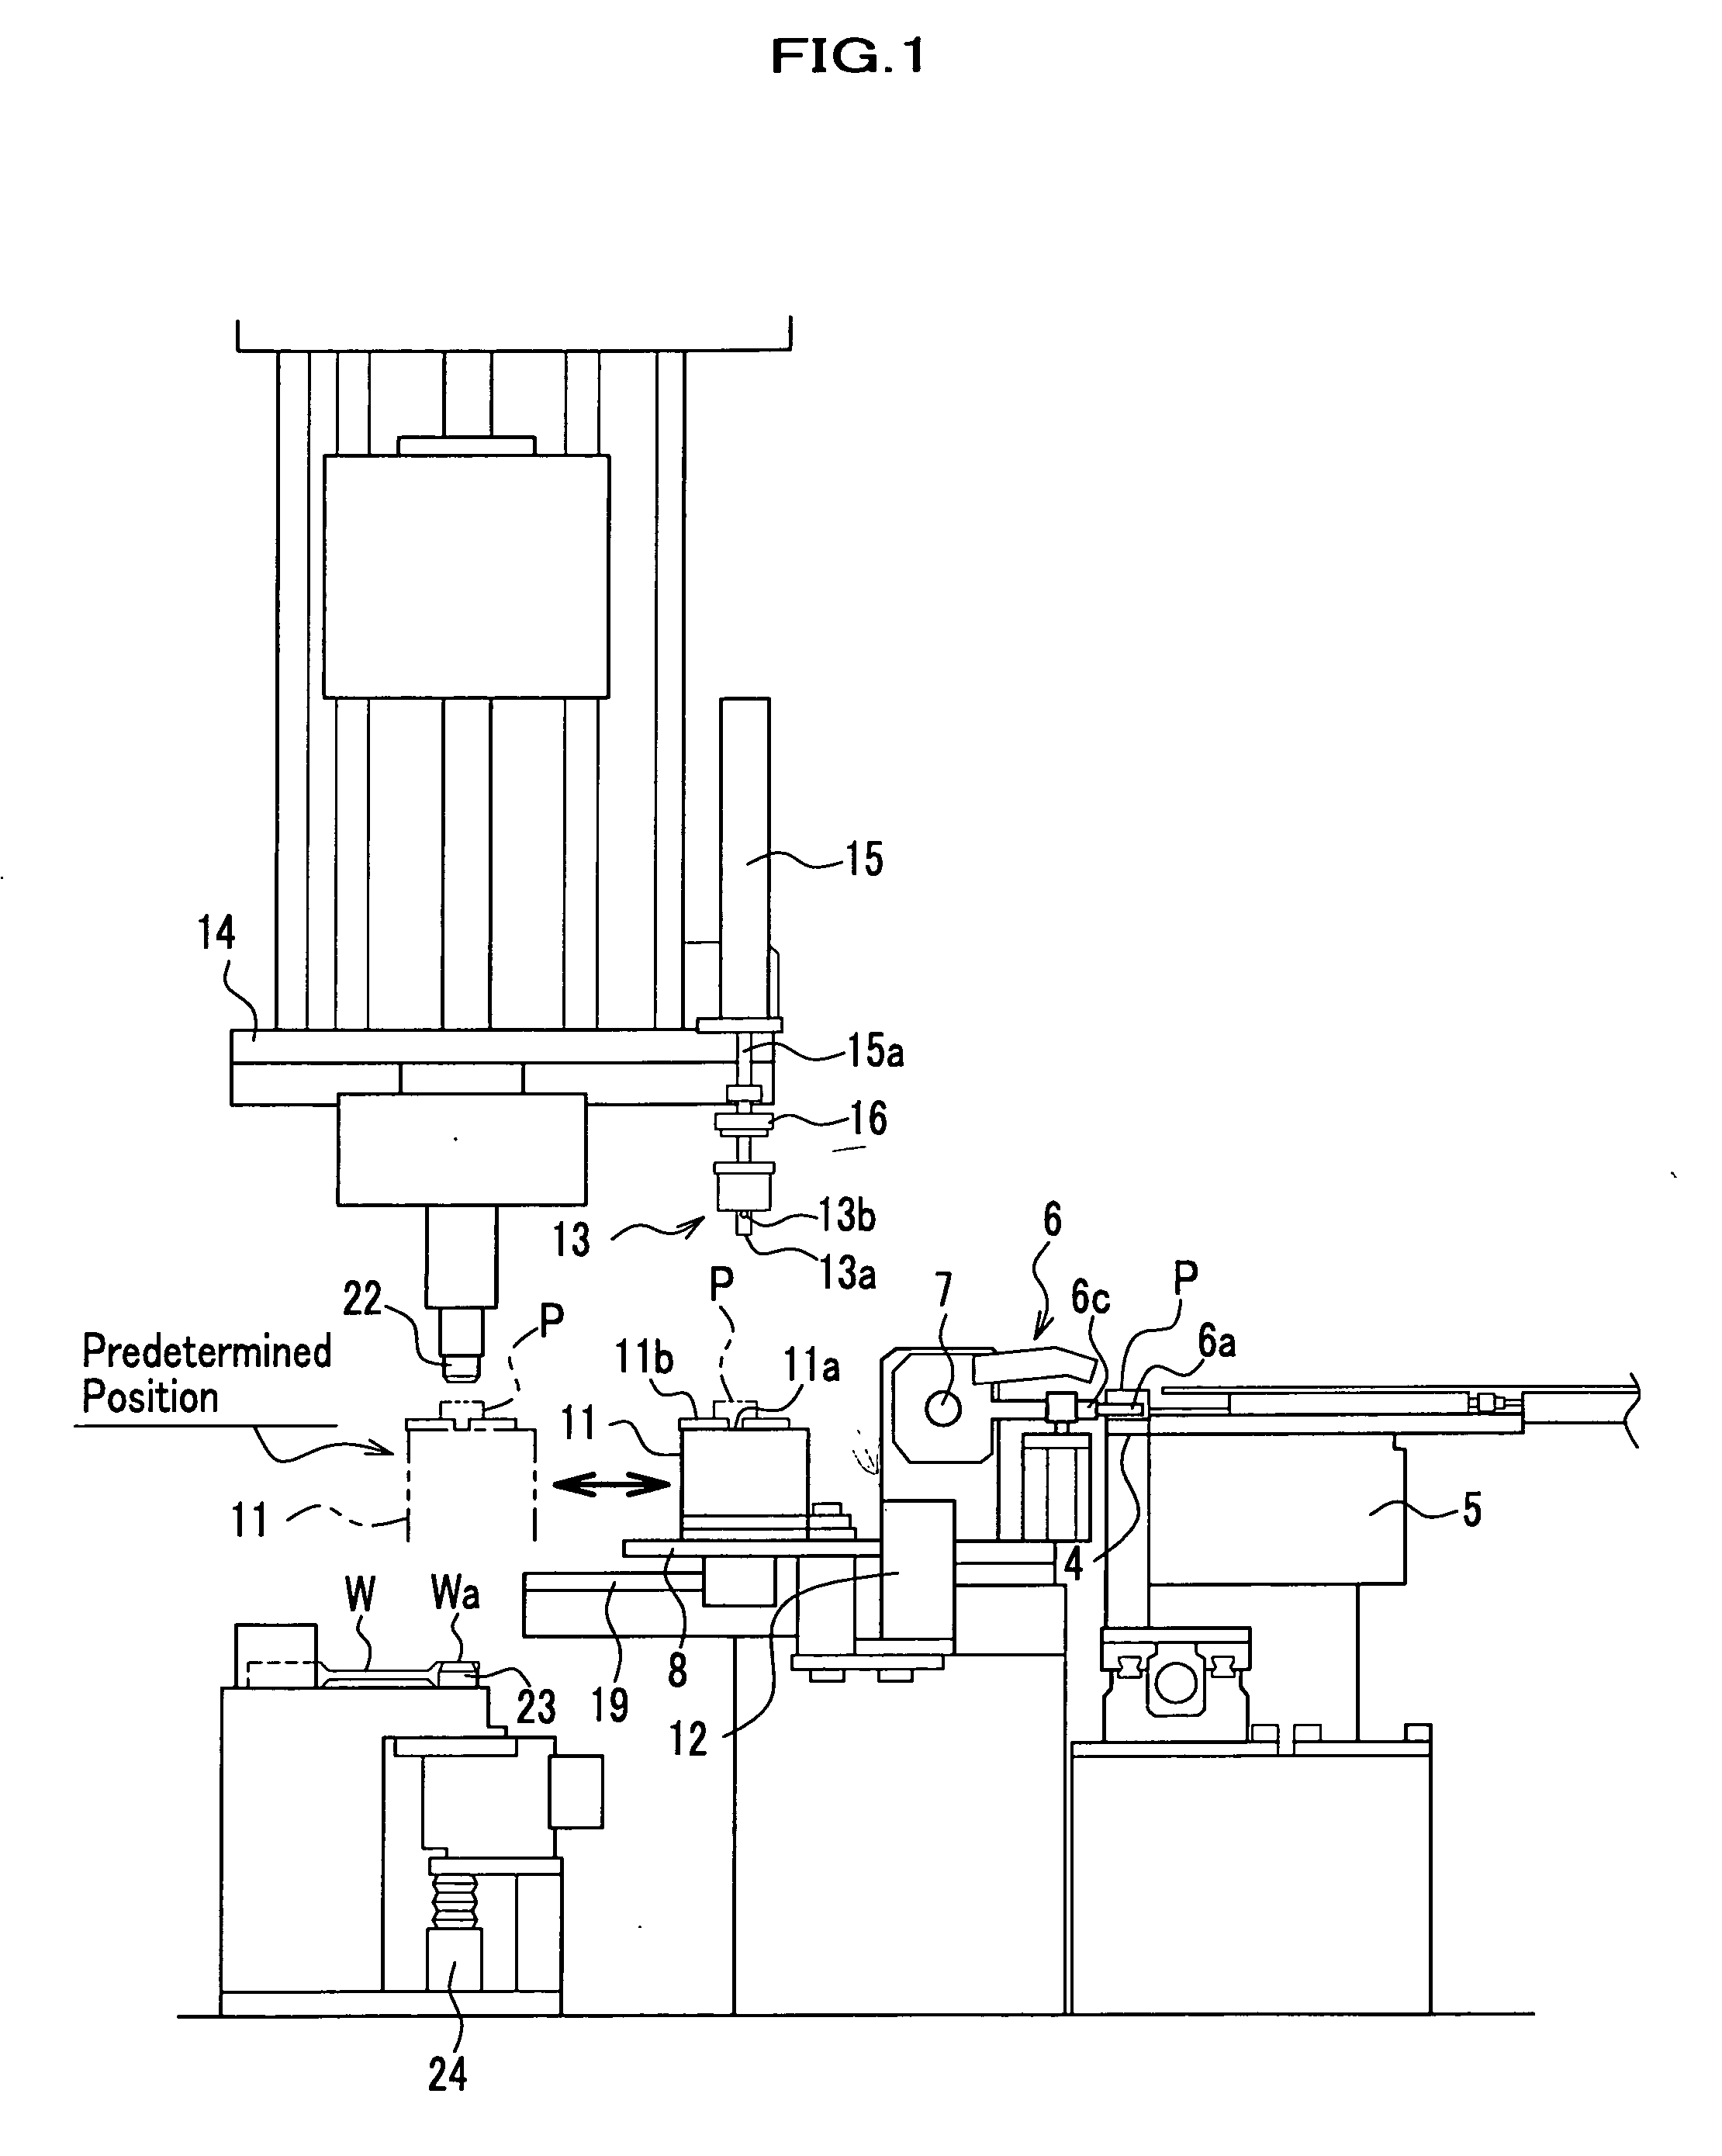 Apparatus for supplying and press-fitting part to work